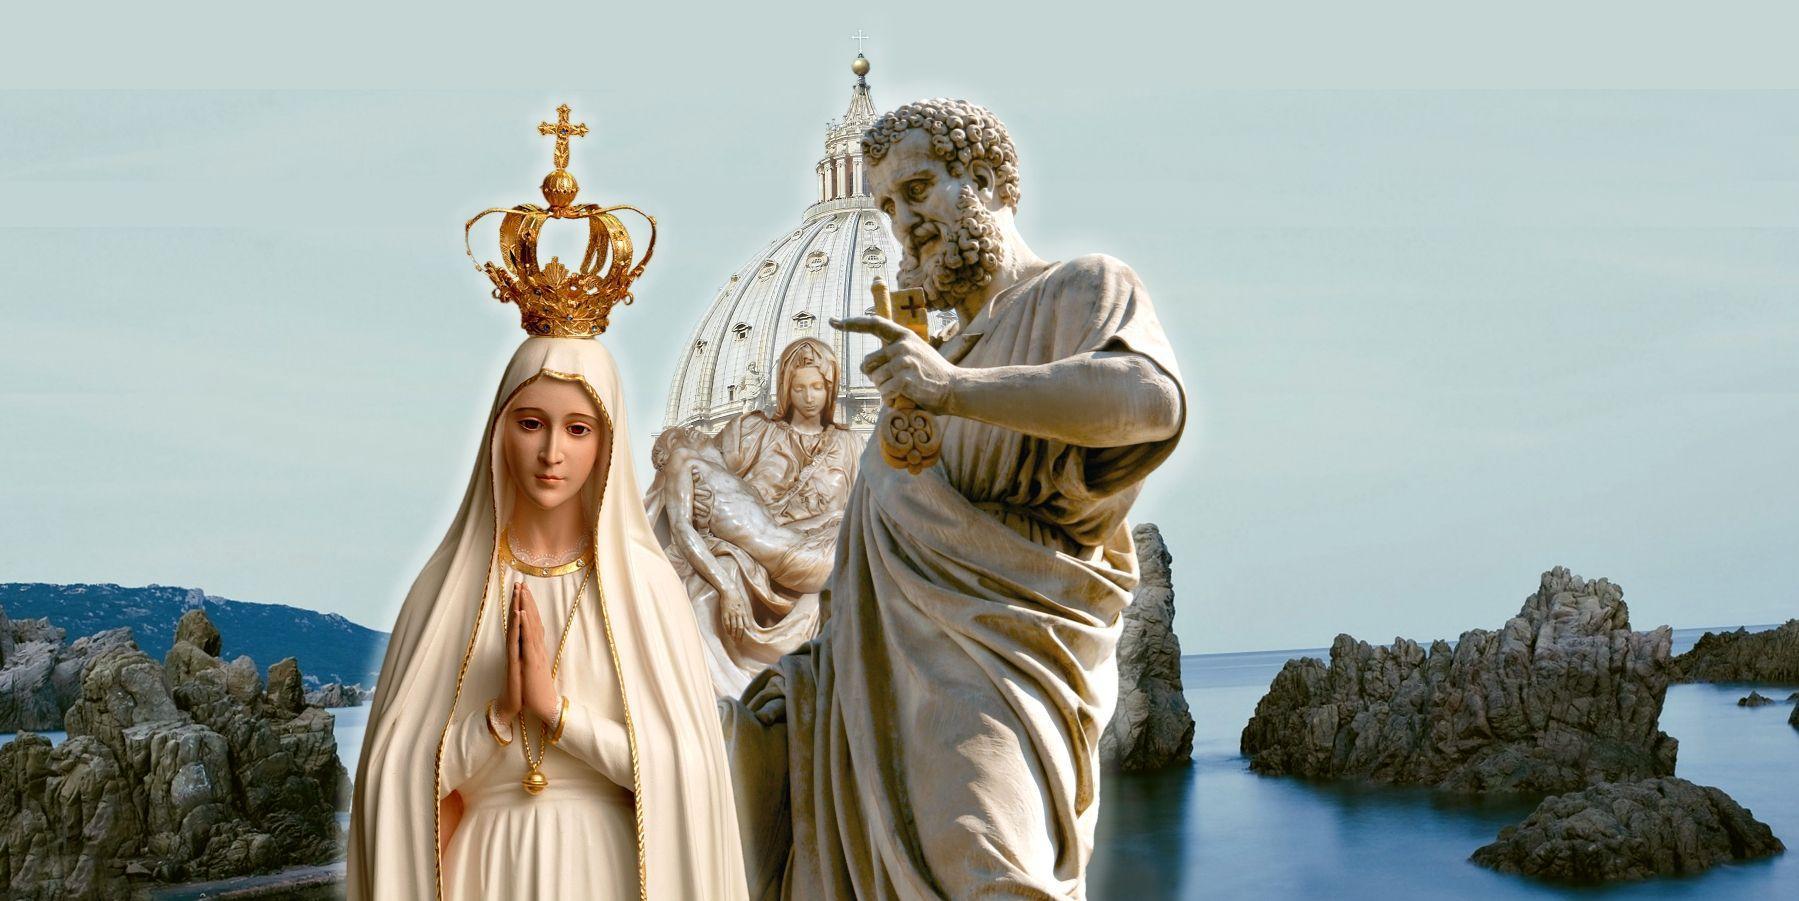 THE PAPACY AND OUR LADY OF FATIMA